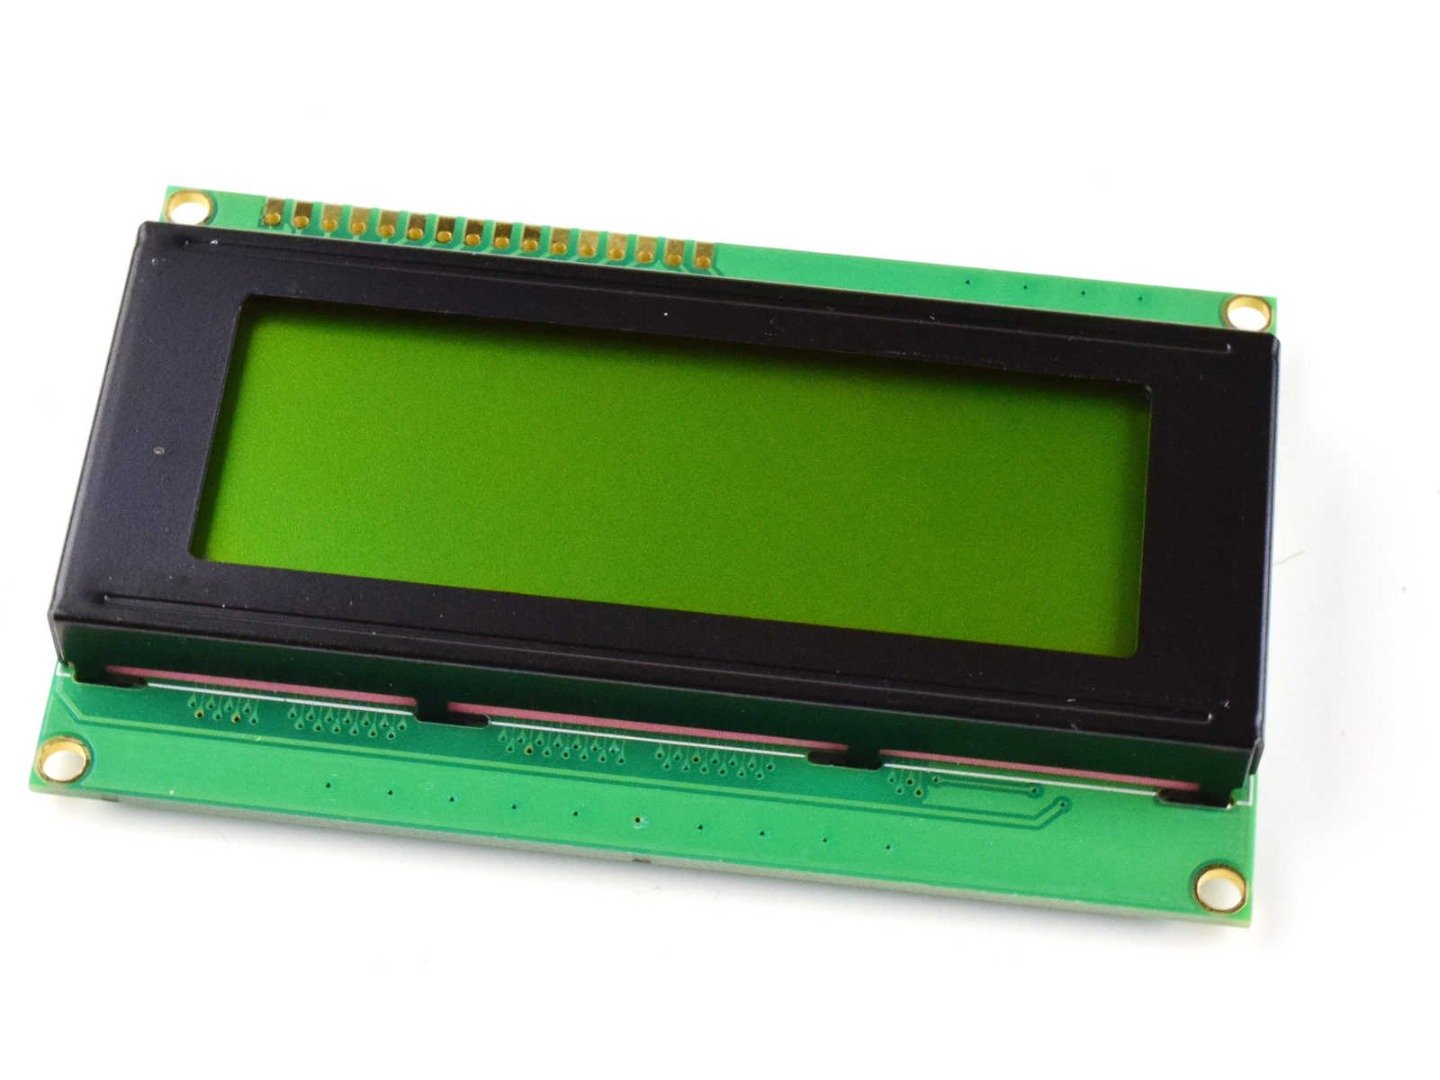 LCD 2004 20×4 Green, Yellow Backlight, parallel or I2C serial 4